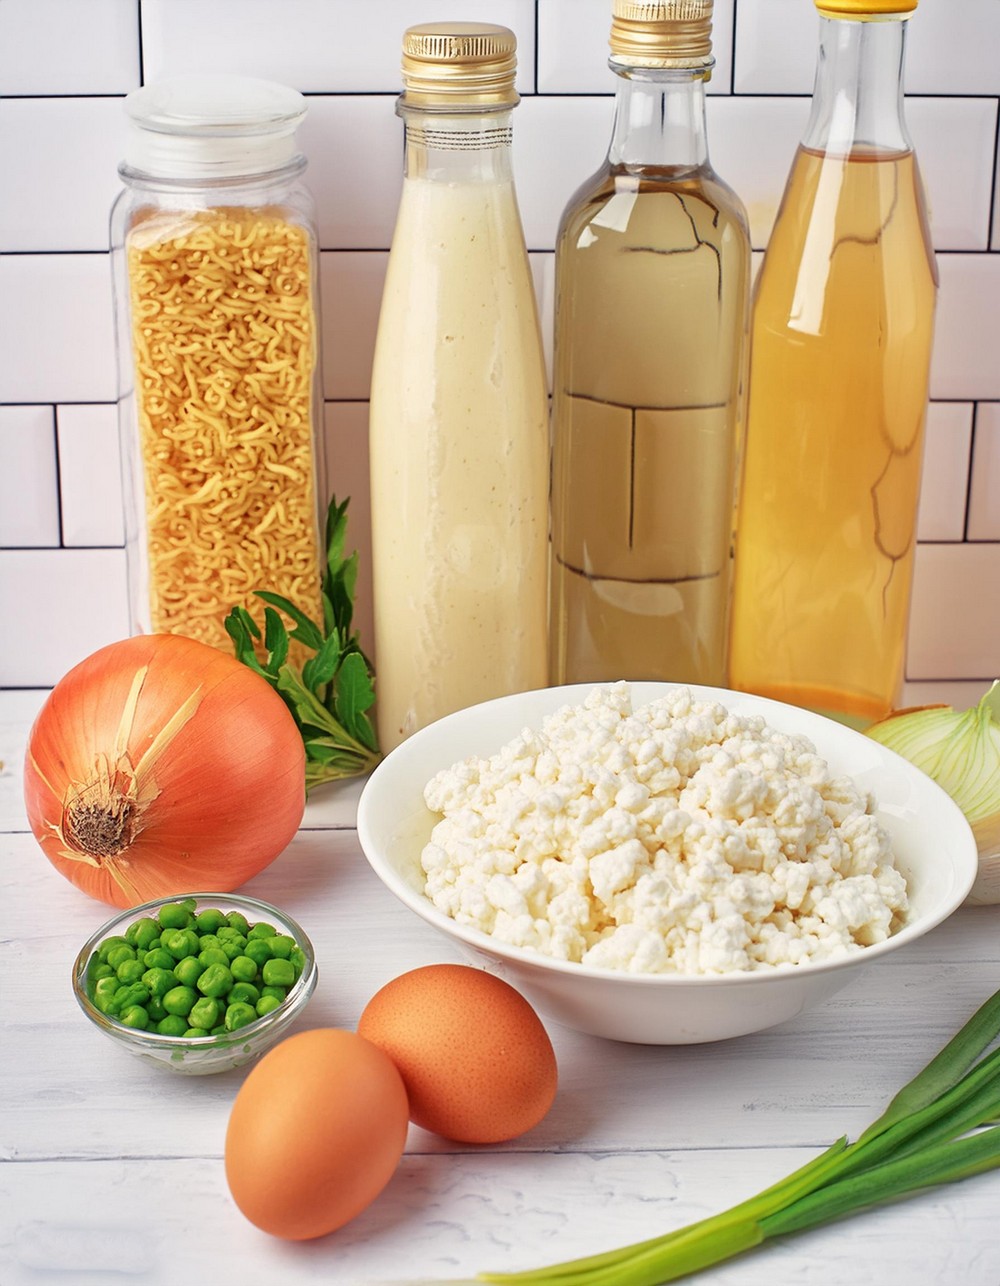 Egg fried rice ingredients